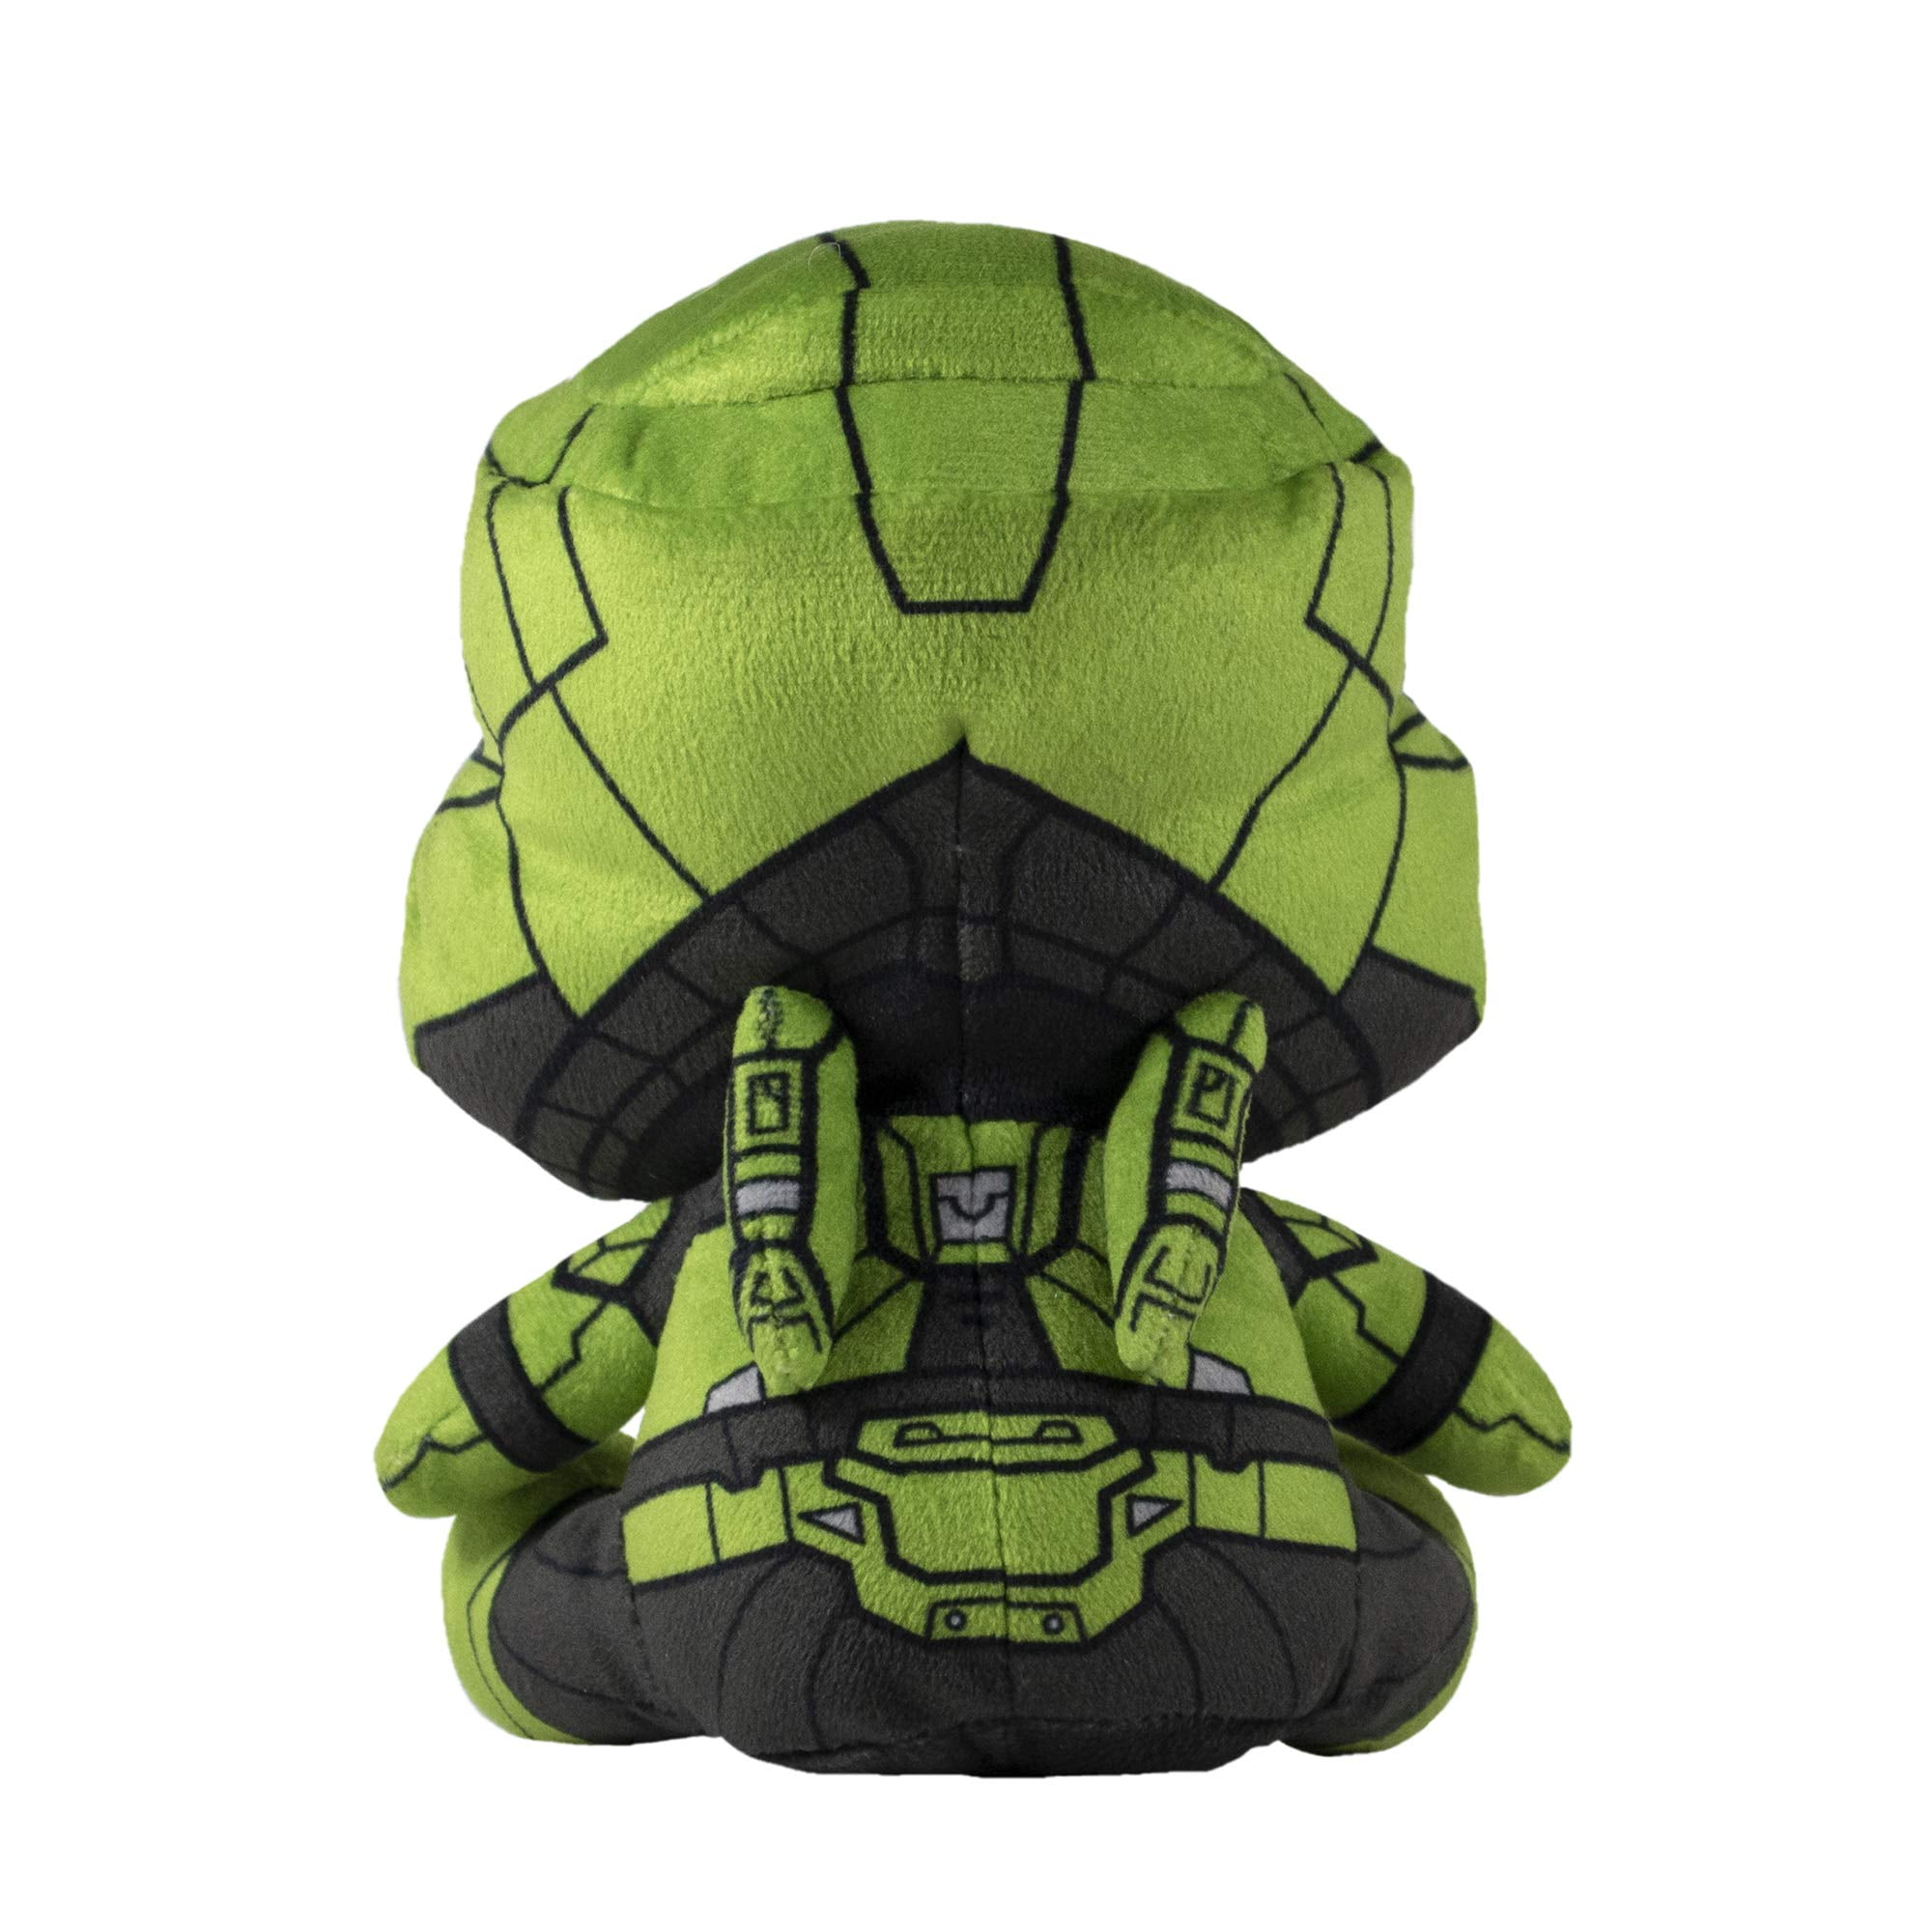 in Hand Halo Master Chief The Stubbins Plush by Mircosoft Innex for sale online 